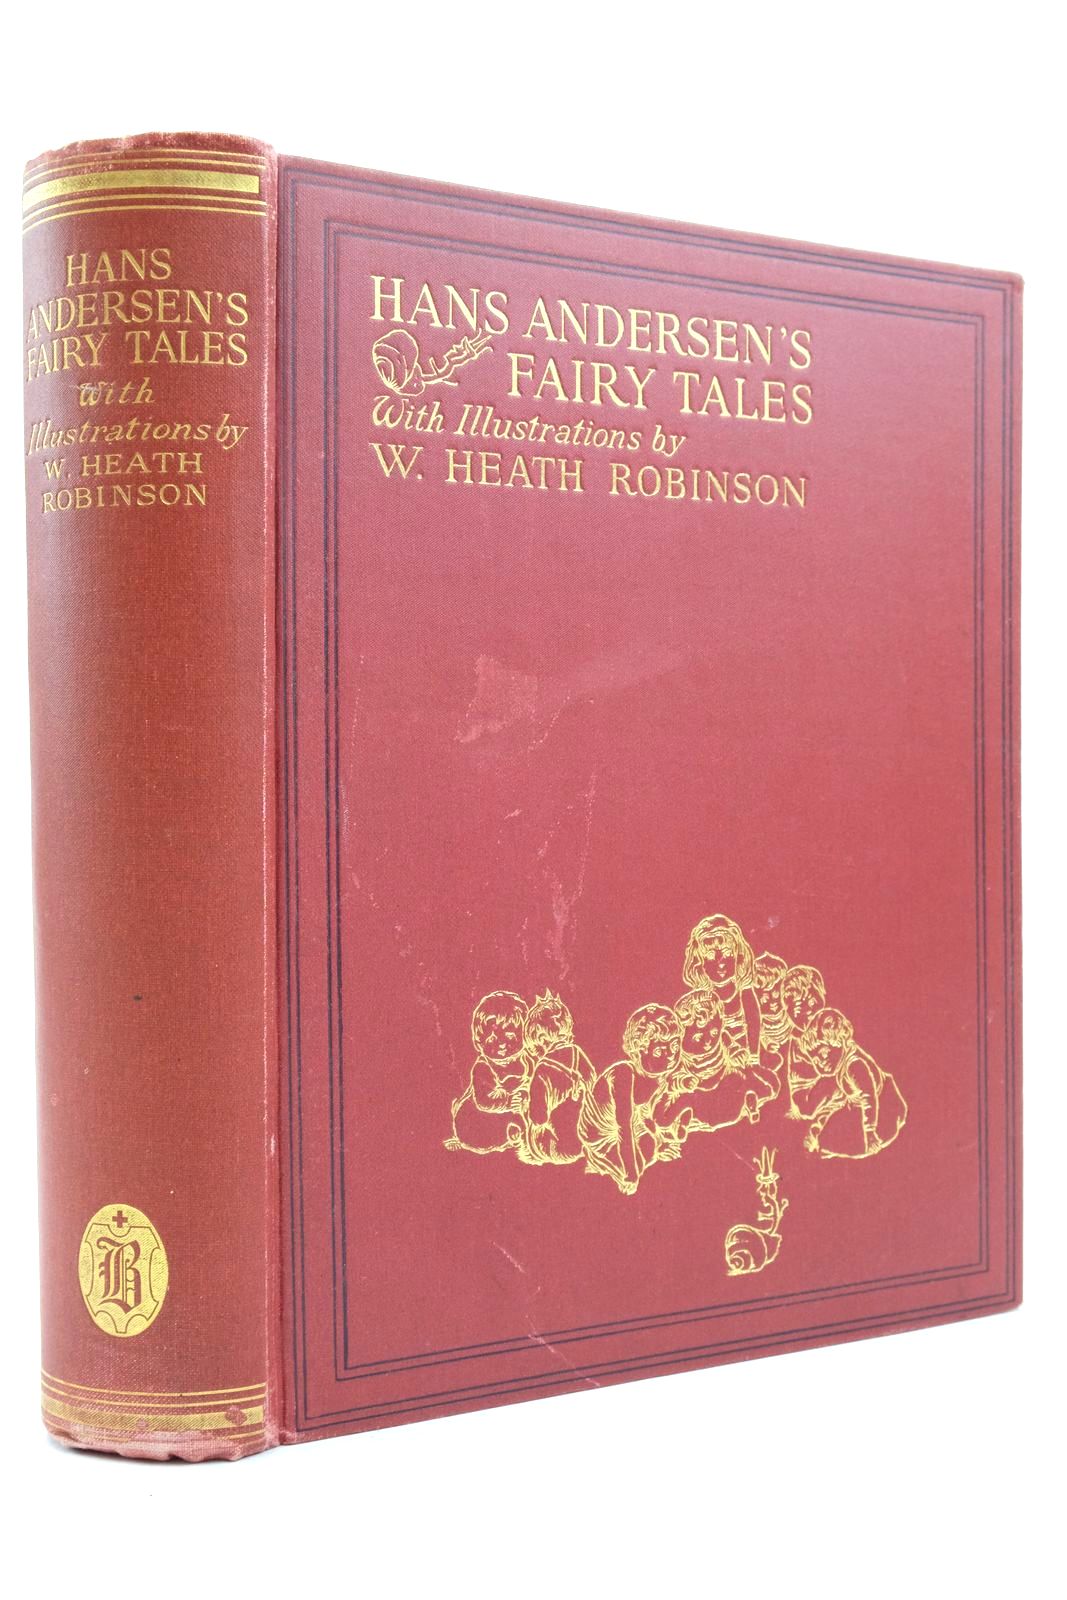 Photo of HANS ANDERSEN'S FAIRY TALES written by Andersen, Hans Christian illustrated by Robinson, W. Heath published by Hodder & Stoughton, Boots the Chemists (STOCK CODE: 2138936)  for sale by Stella & Rose's Books